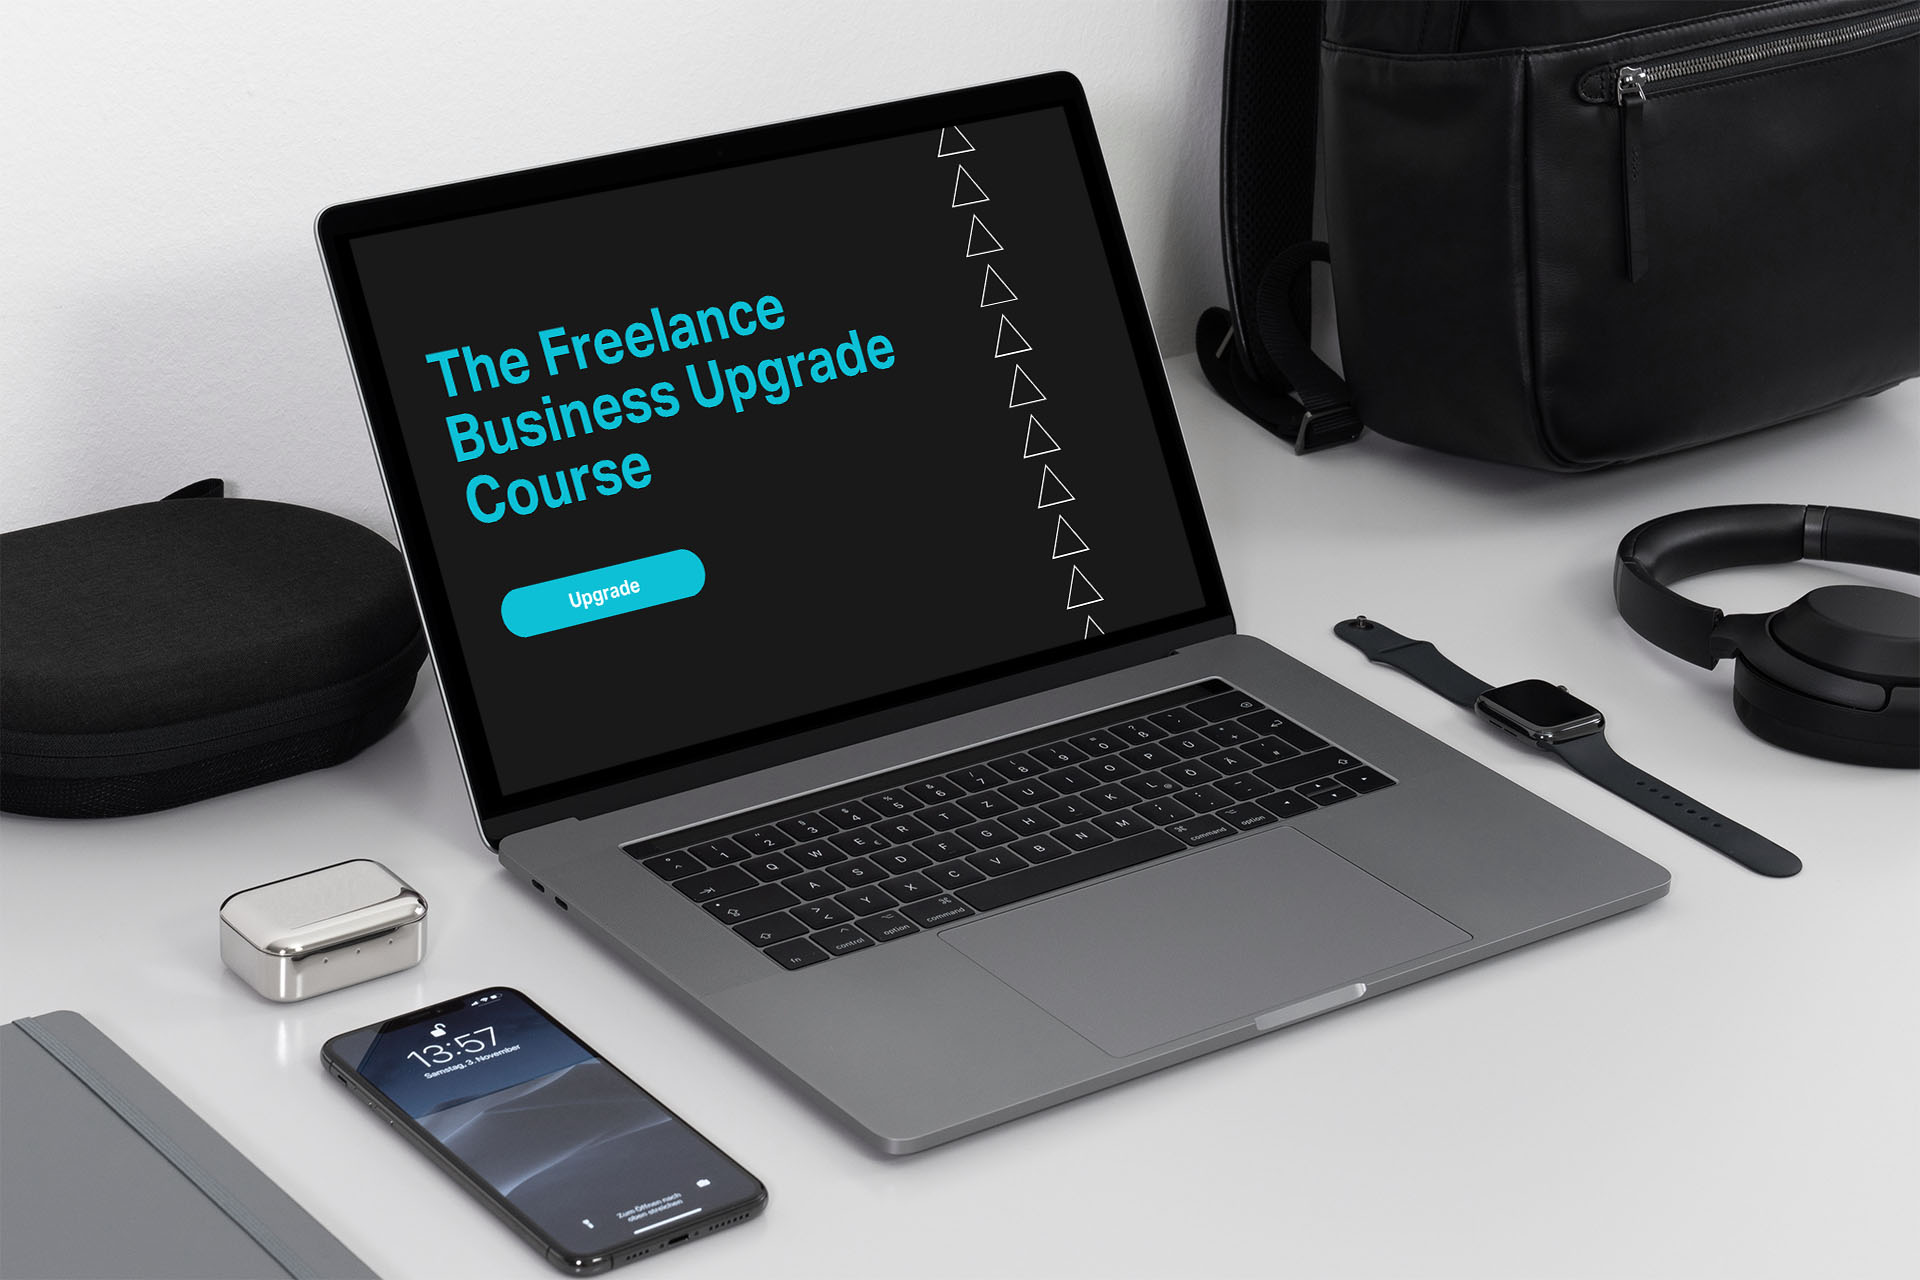 The Freelance Business Upgrade Course